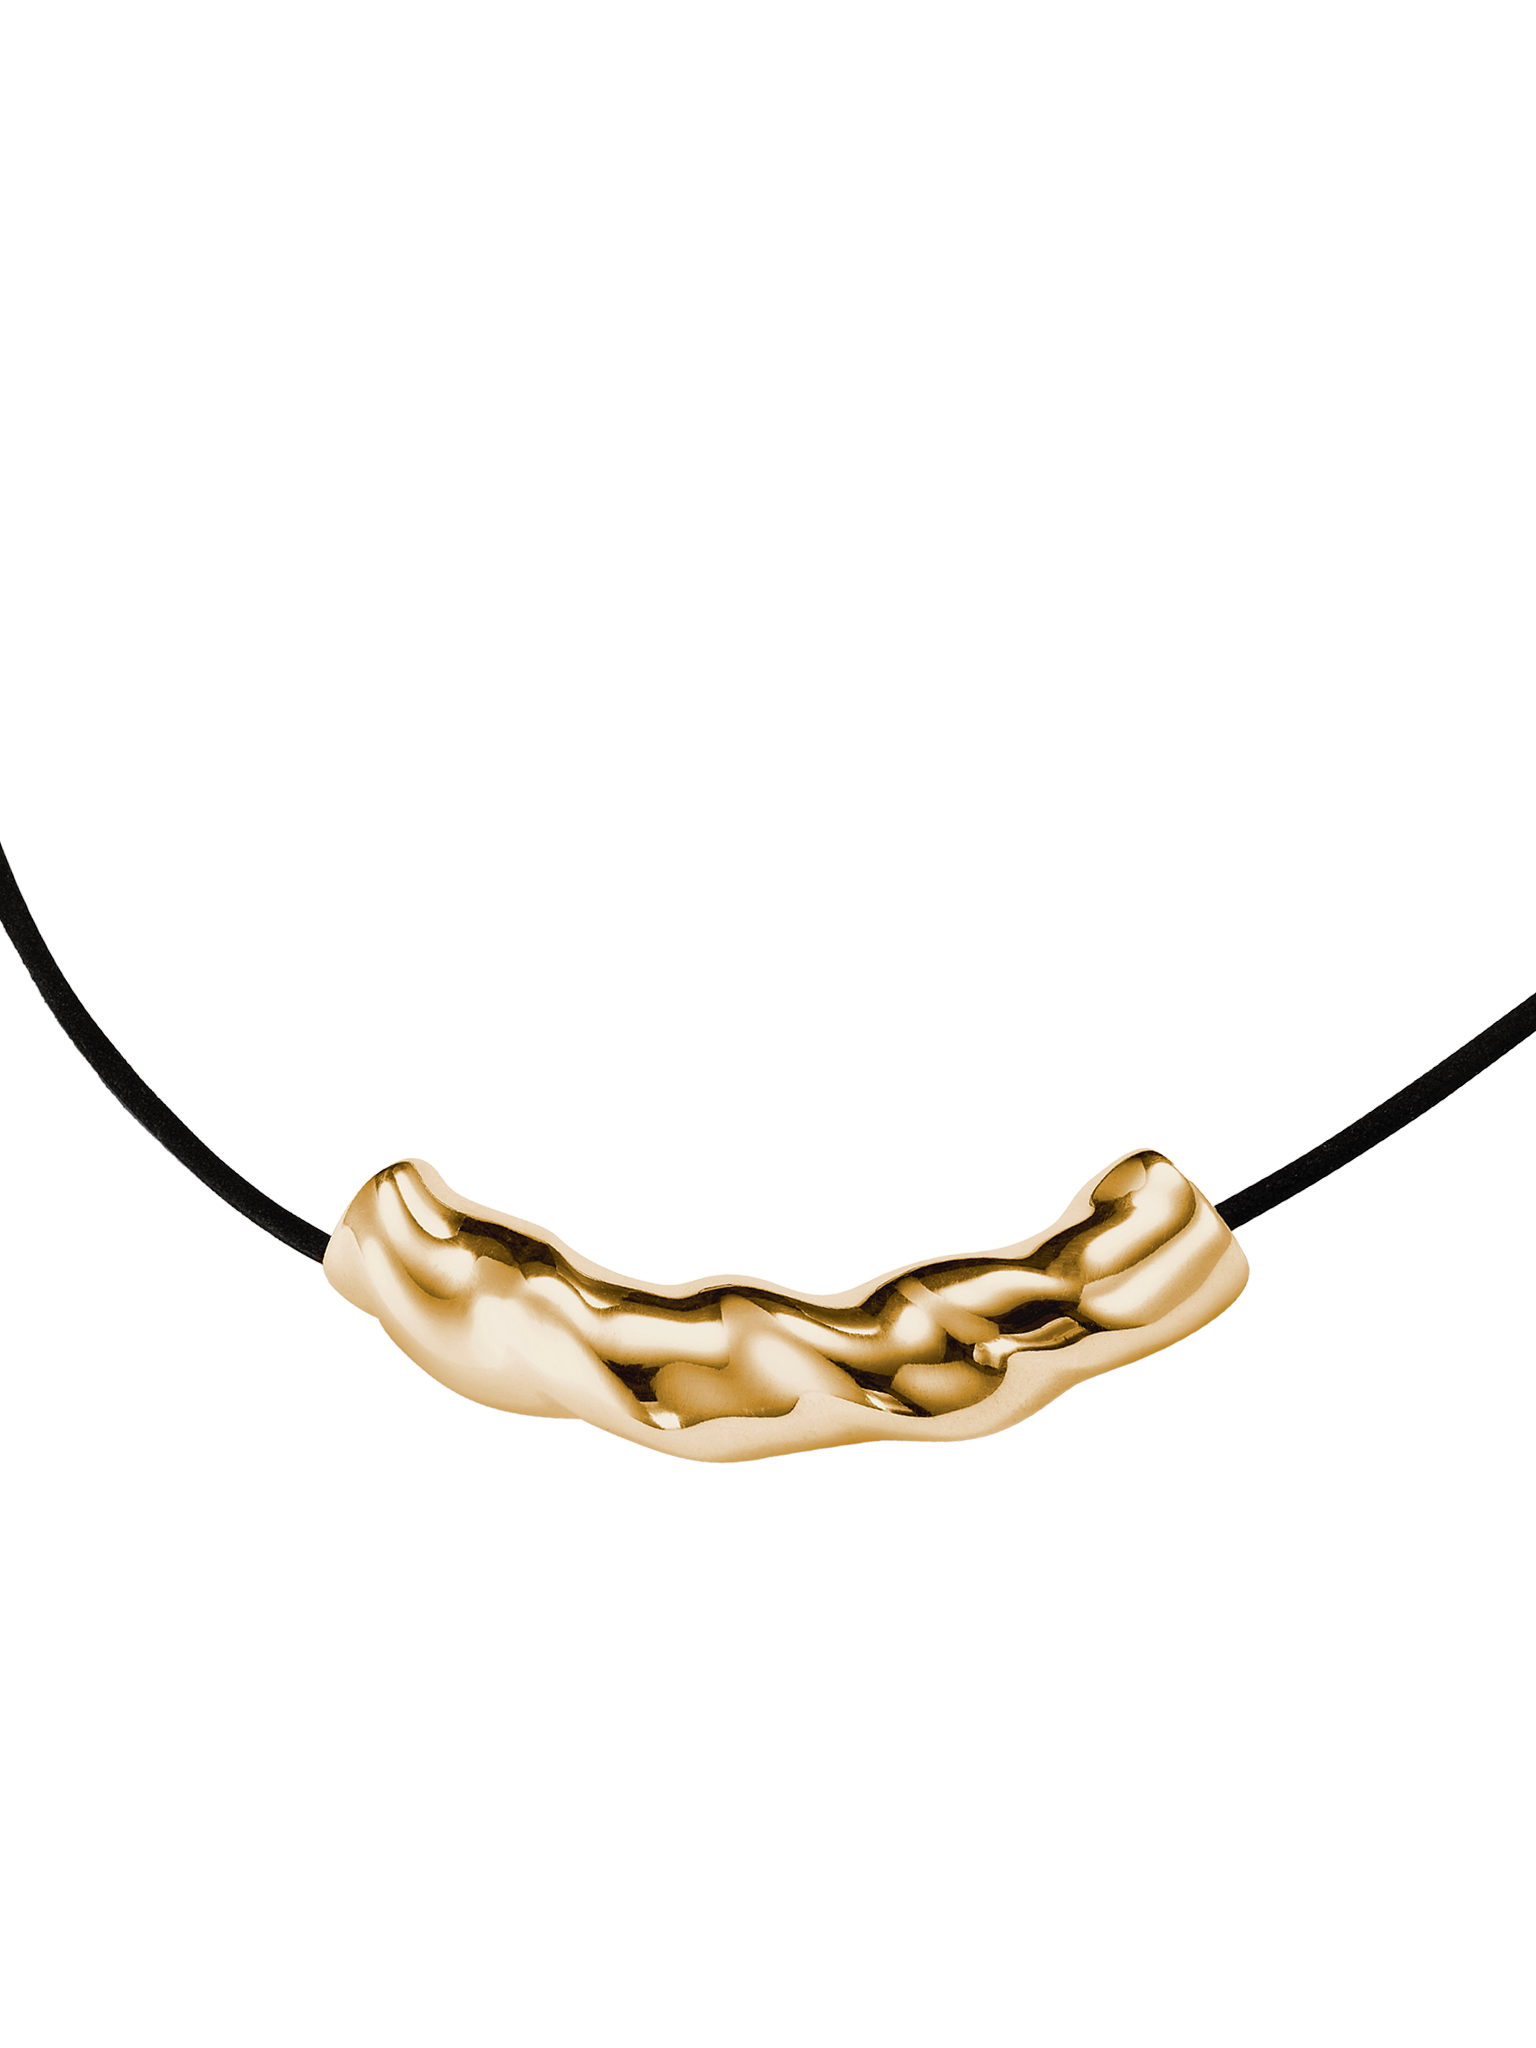 Small astrid pendant in gold vermeil